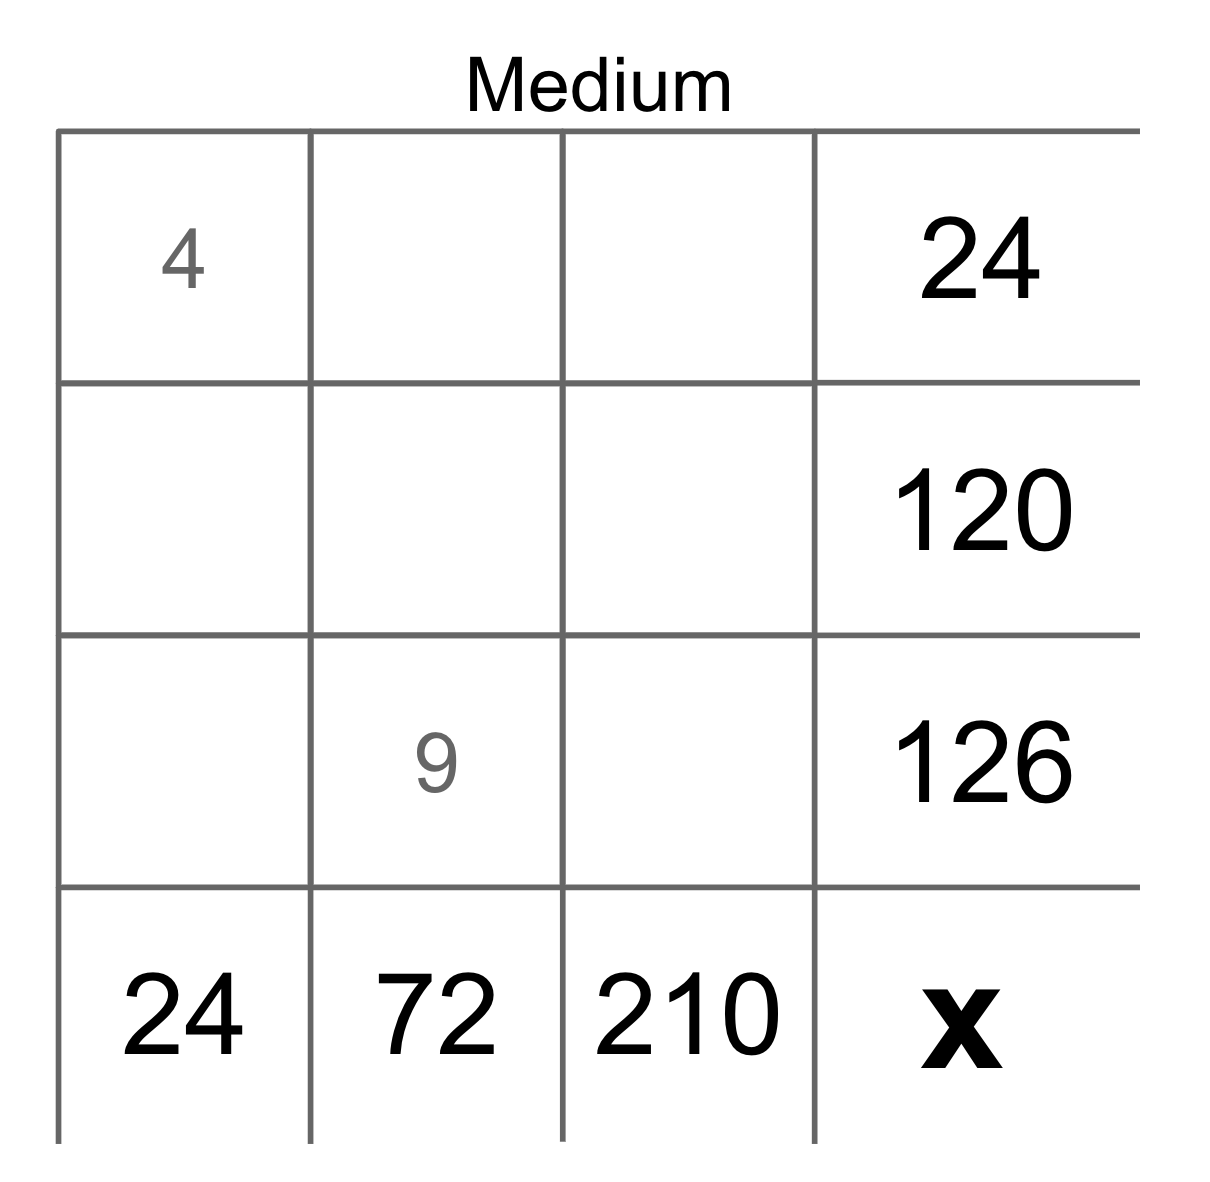 A medium difficulty three-by-three yohaku puzzle where numbers need to multiply down to the products 24, 72, and 210 (at the bottom), as well as across to the products 24, 120, and 126 (down the right side.) The top right digit has been filled in as a 4, and the bottom middle digit has been filled in as a 9.